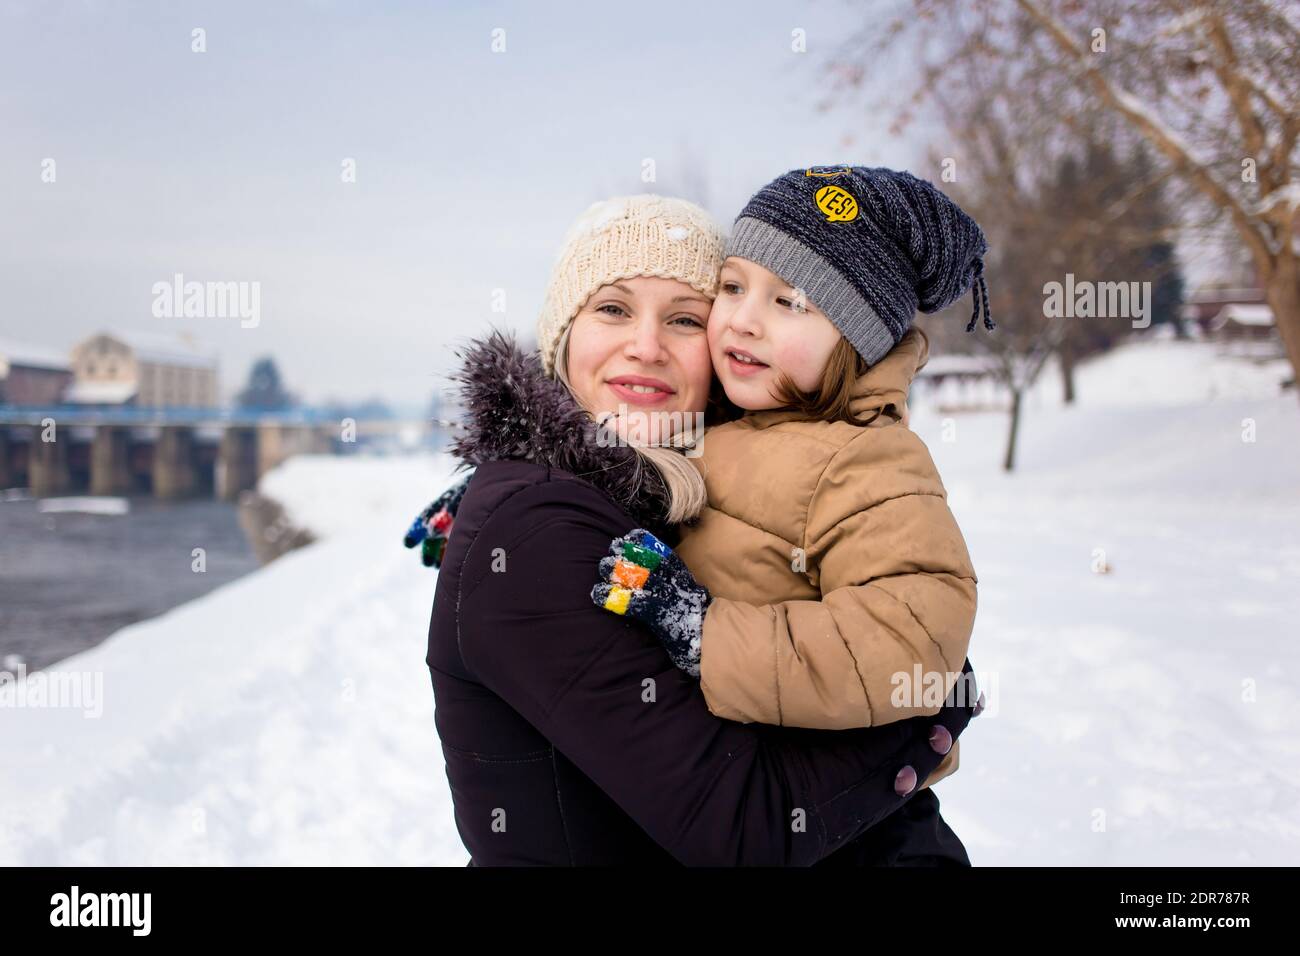 Mom and son in winter clothing hugging Stock Photo